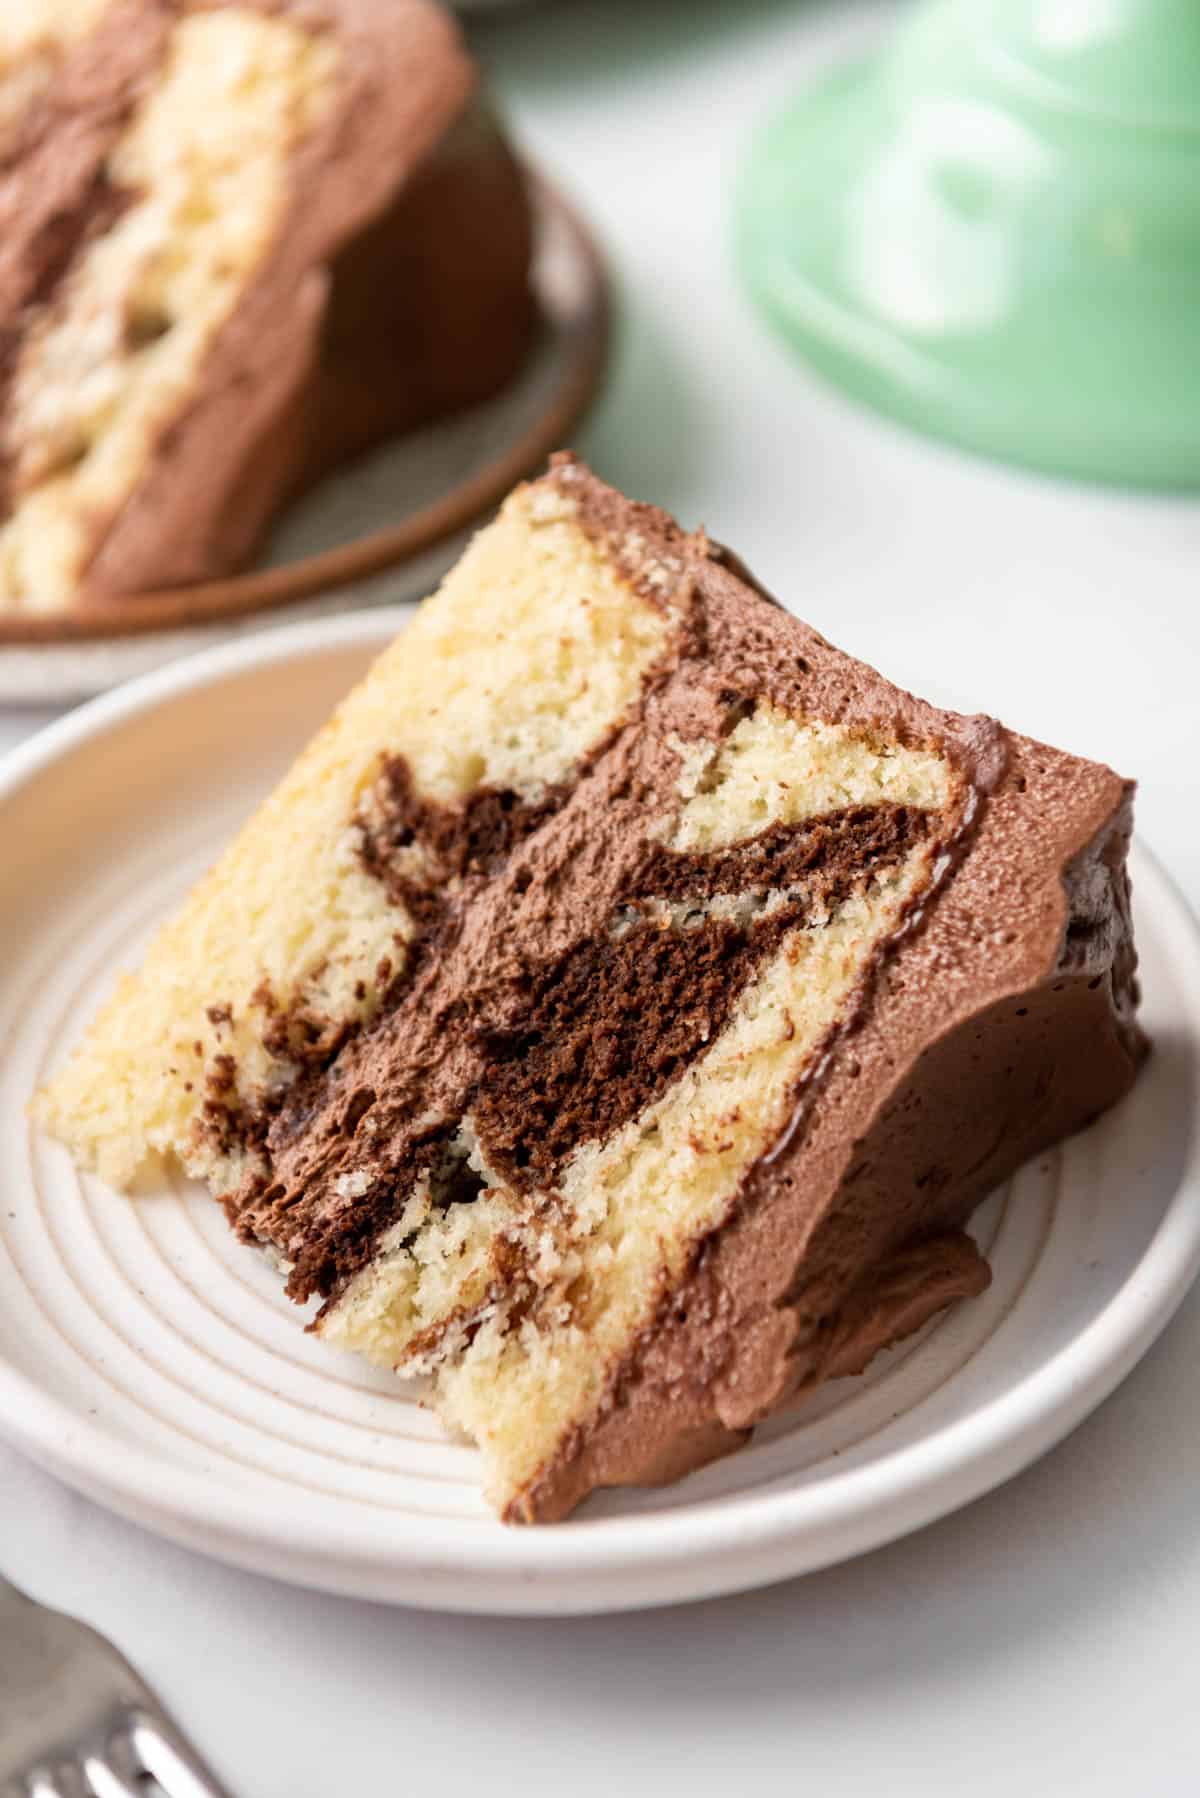 A slice of homemade marble cake on a white plate.